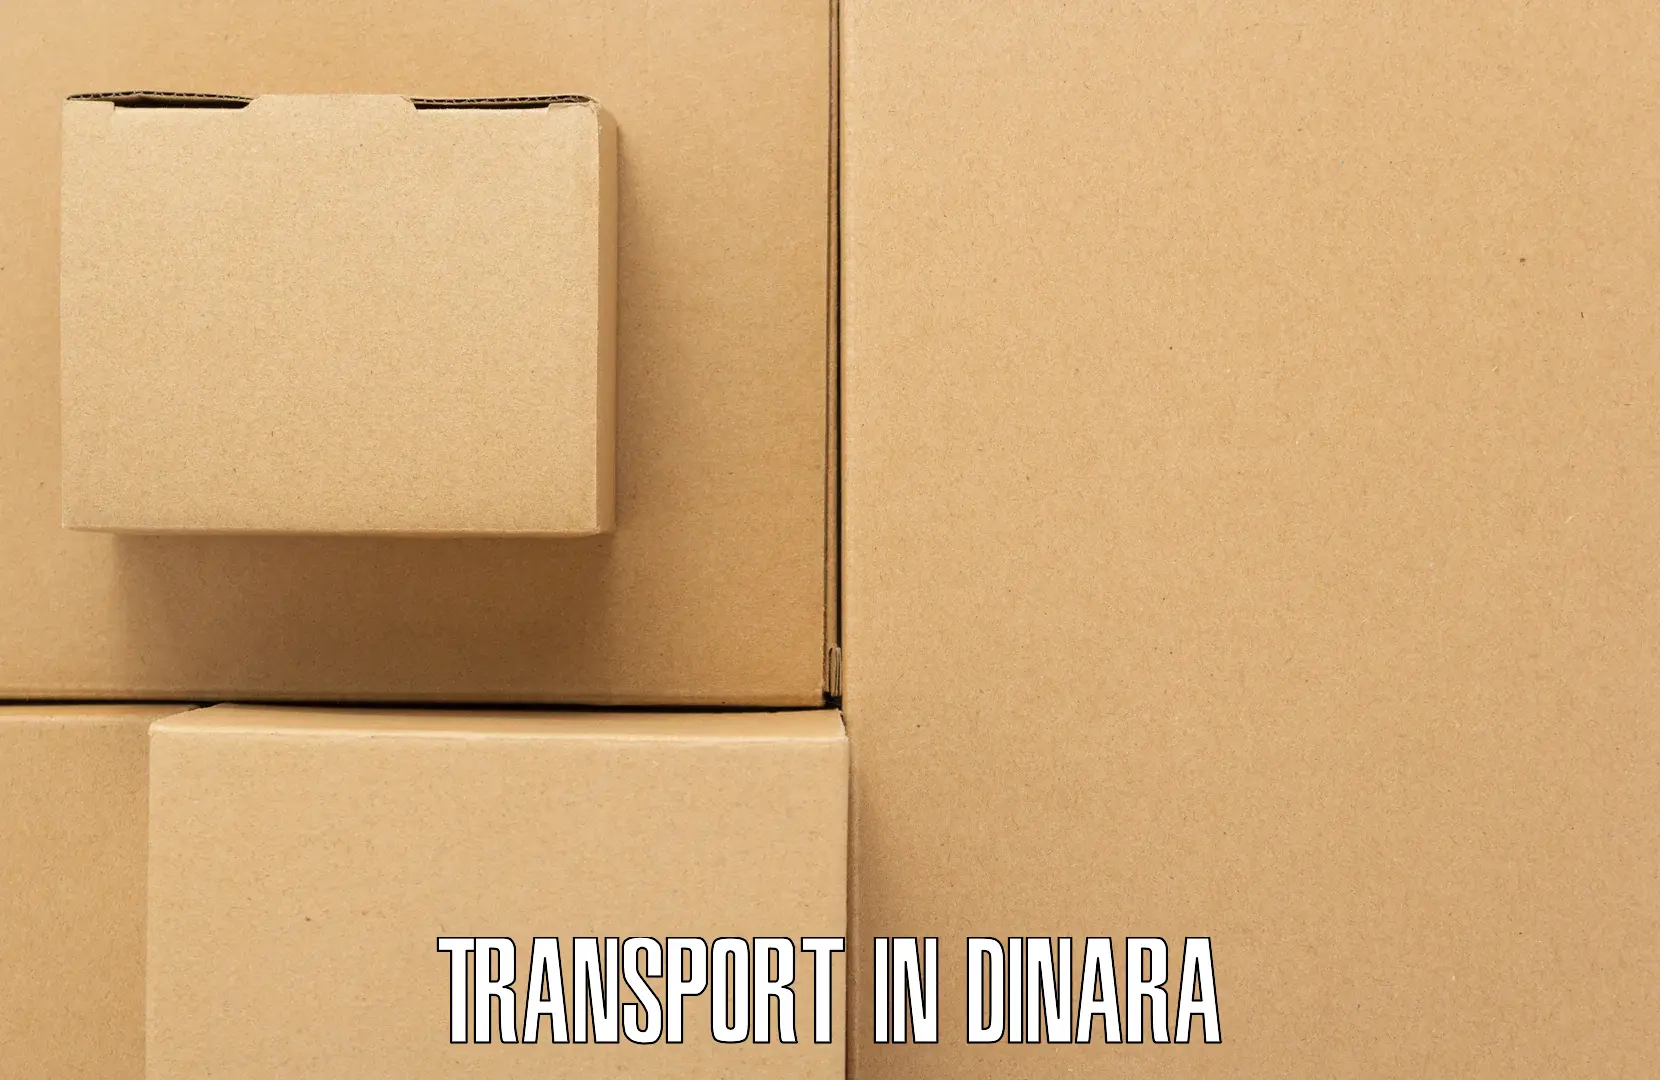 Daily parcel service transport in Dinara